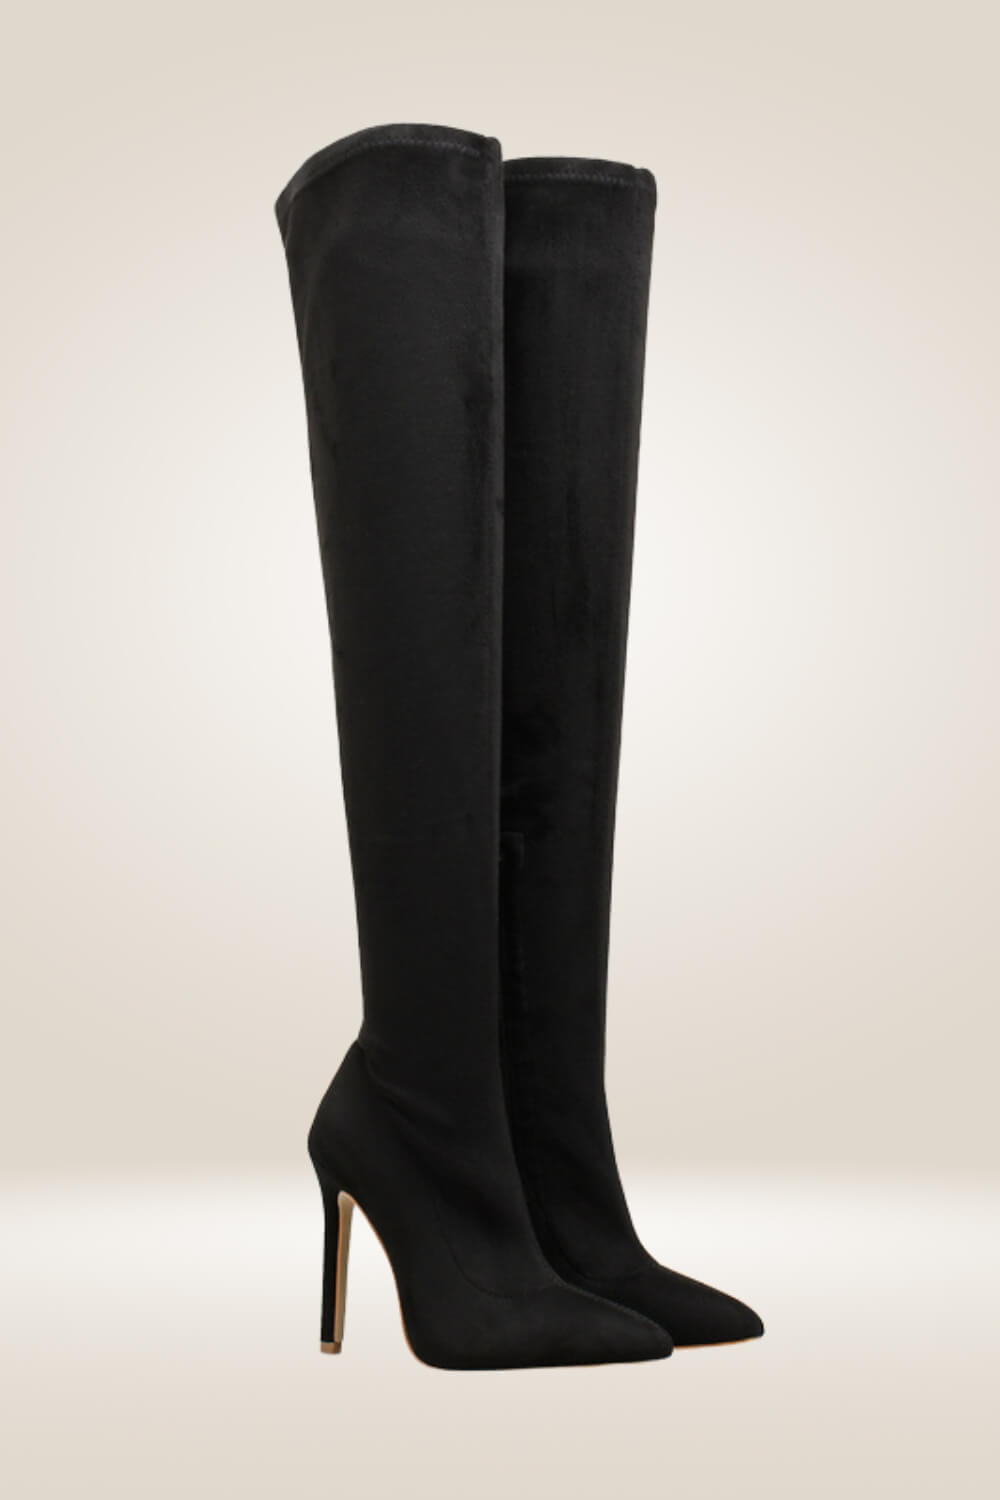 Black Over The Knee High Heel Boots - TGC Boutique - Boots